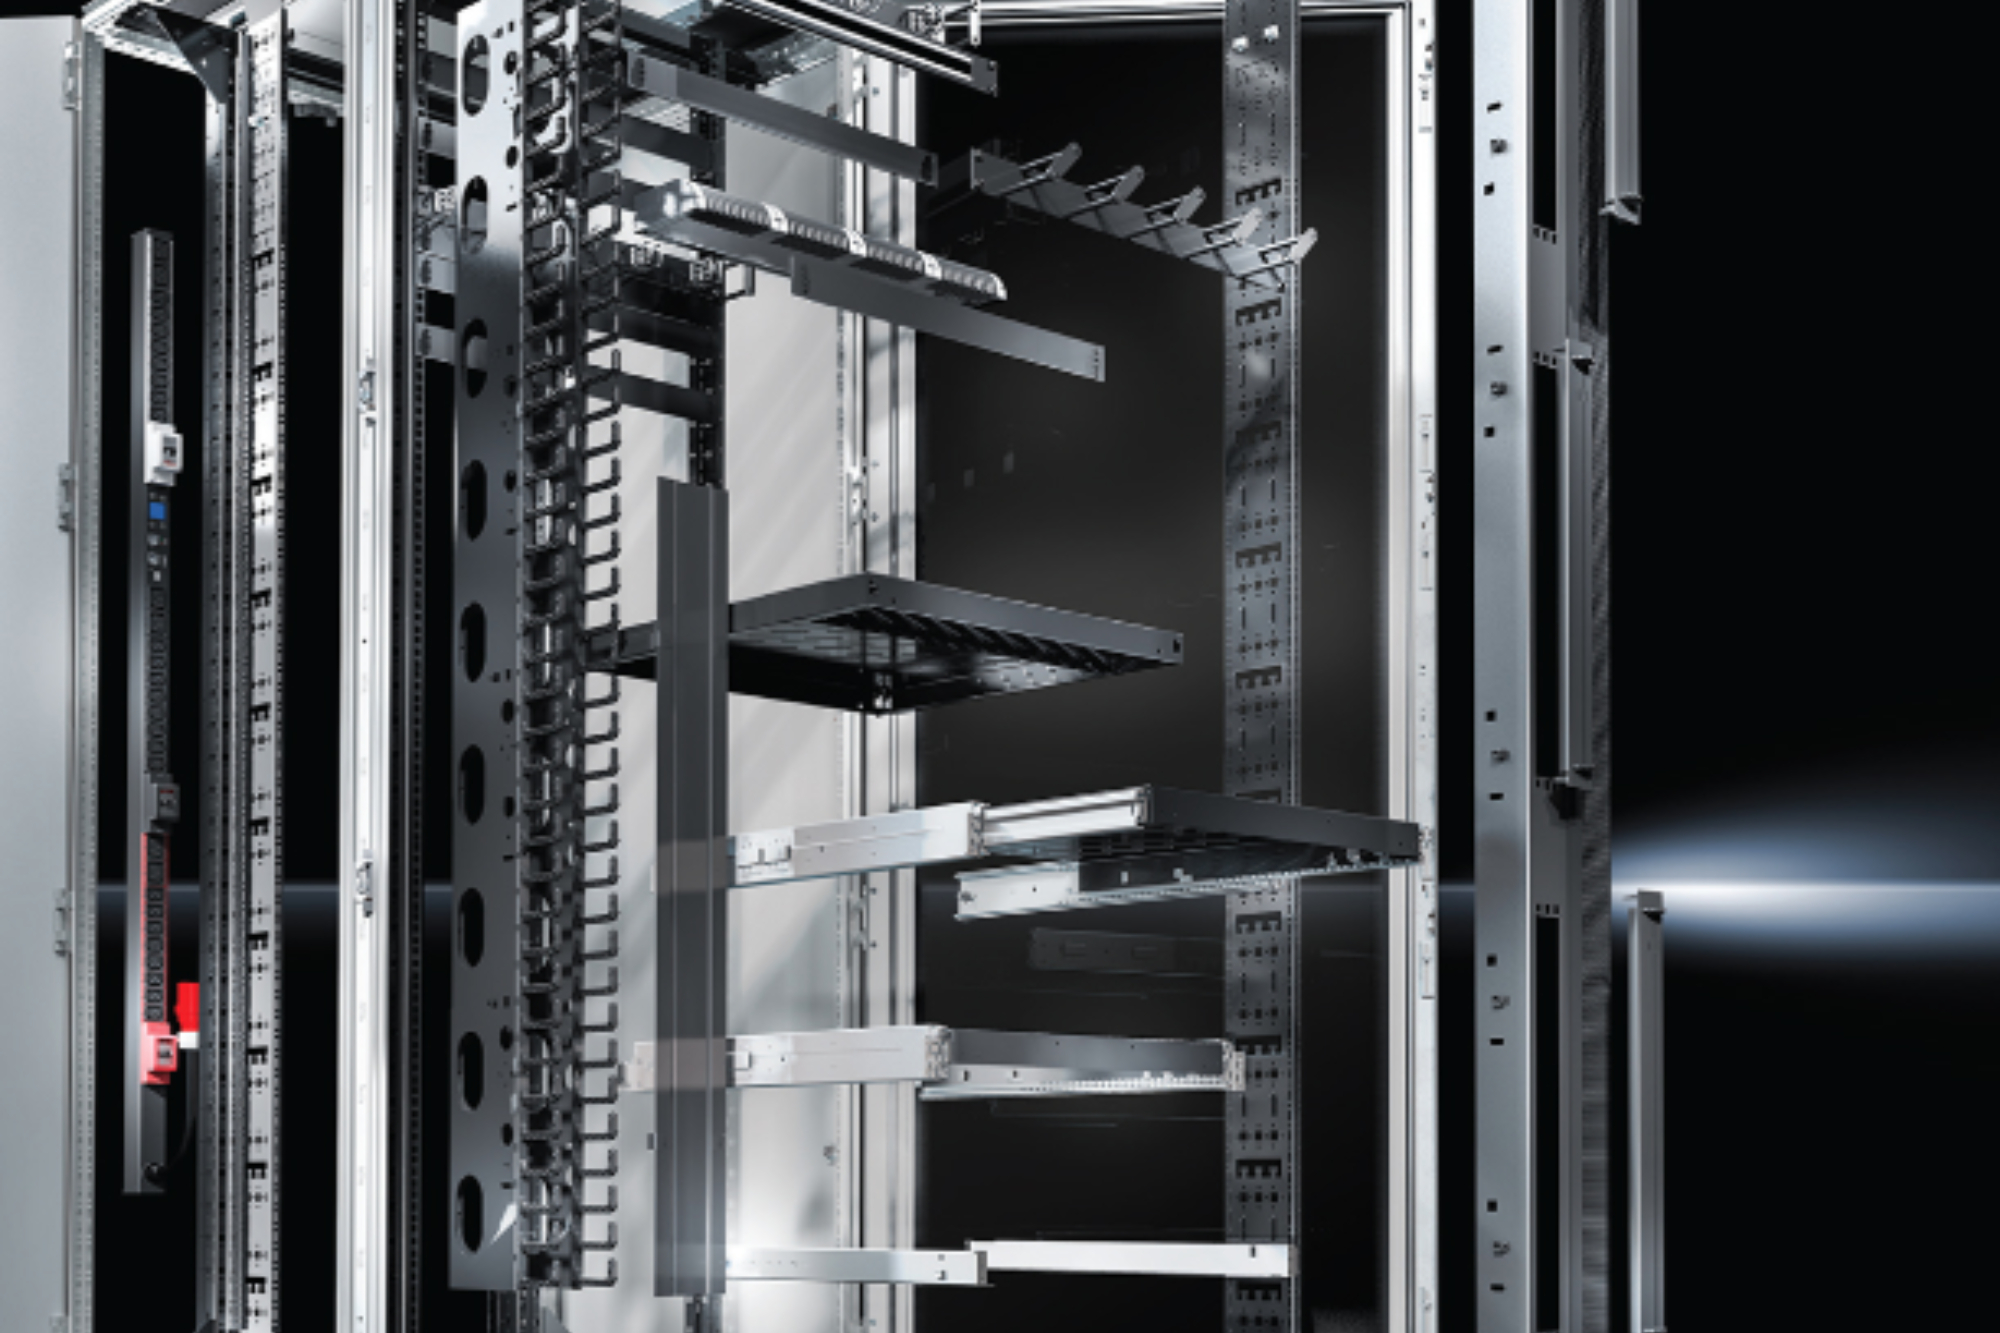 Optimizing IT Performance with Inrack Cooling Technology